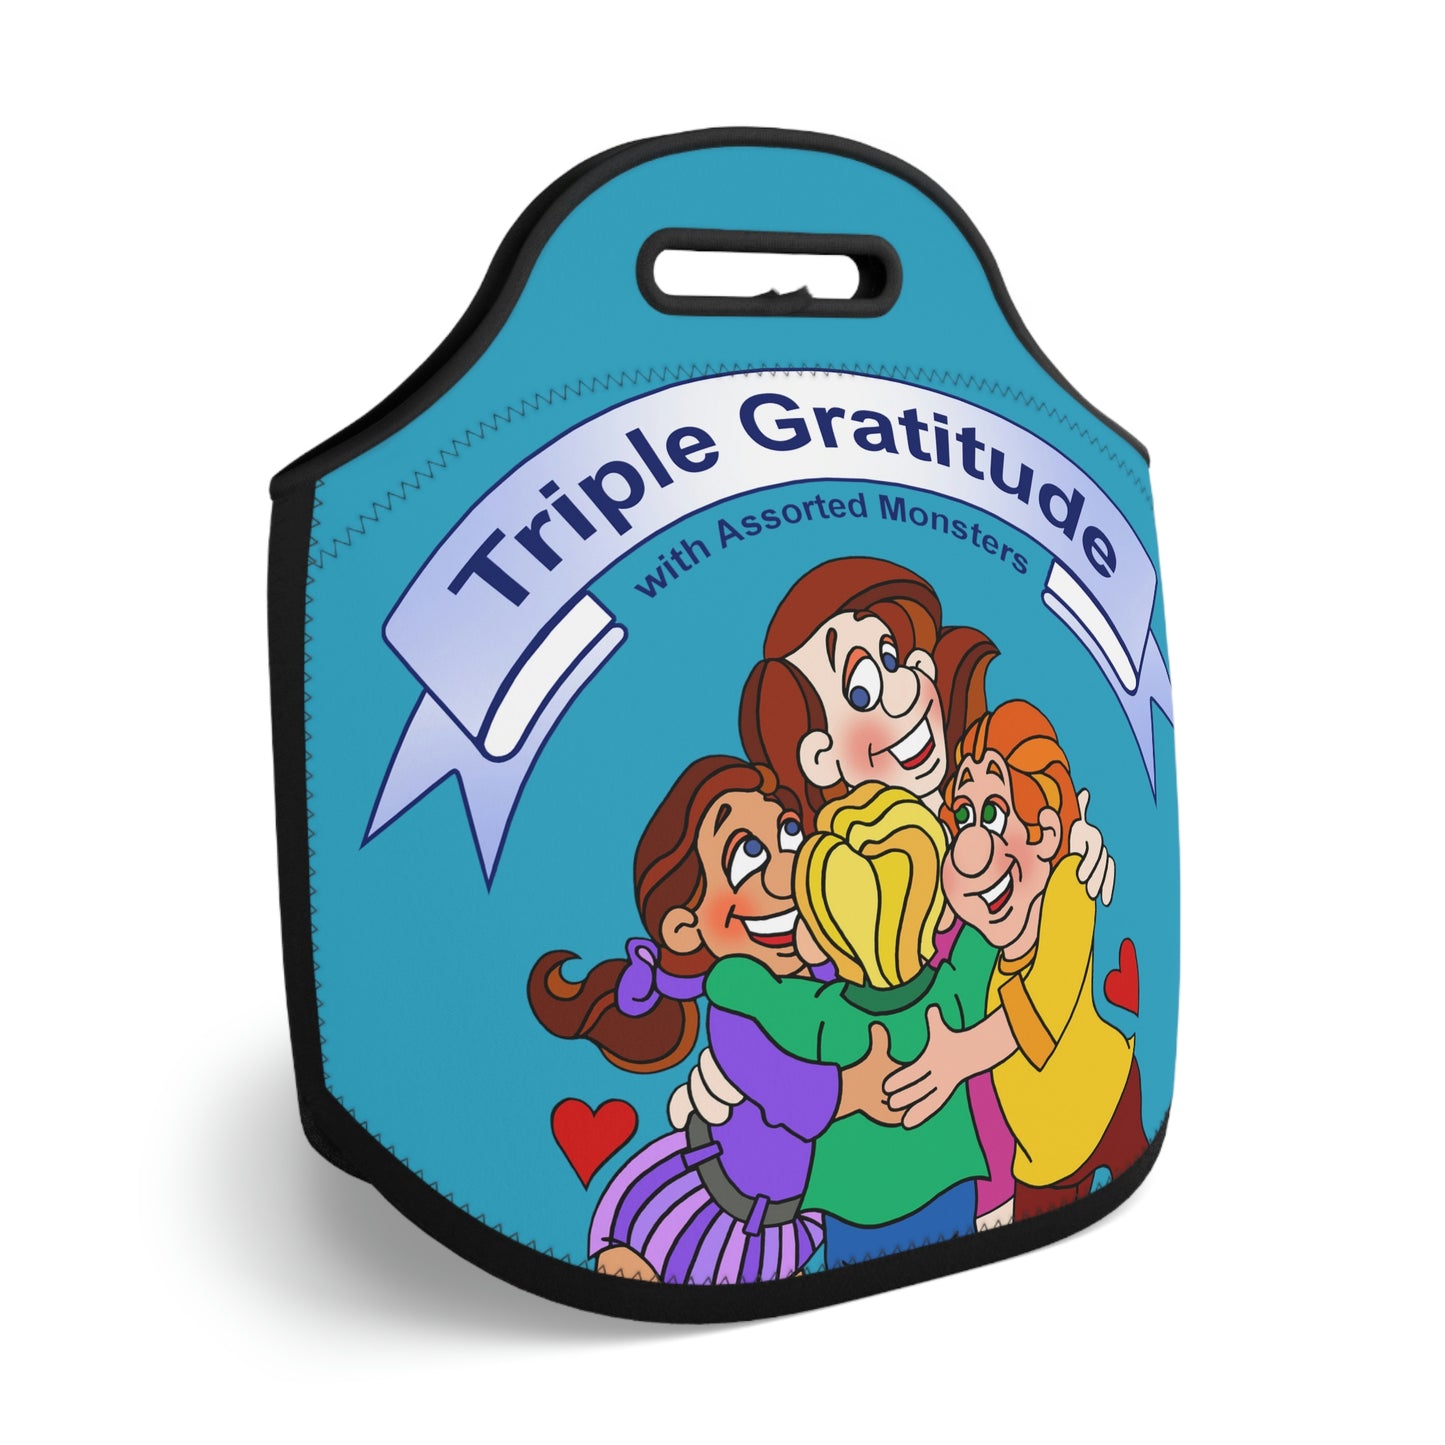 Triple Gratitude with Assorted Monsters Neoprene Lunch Bag